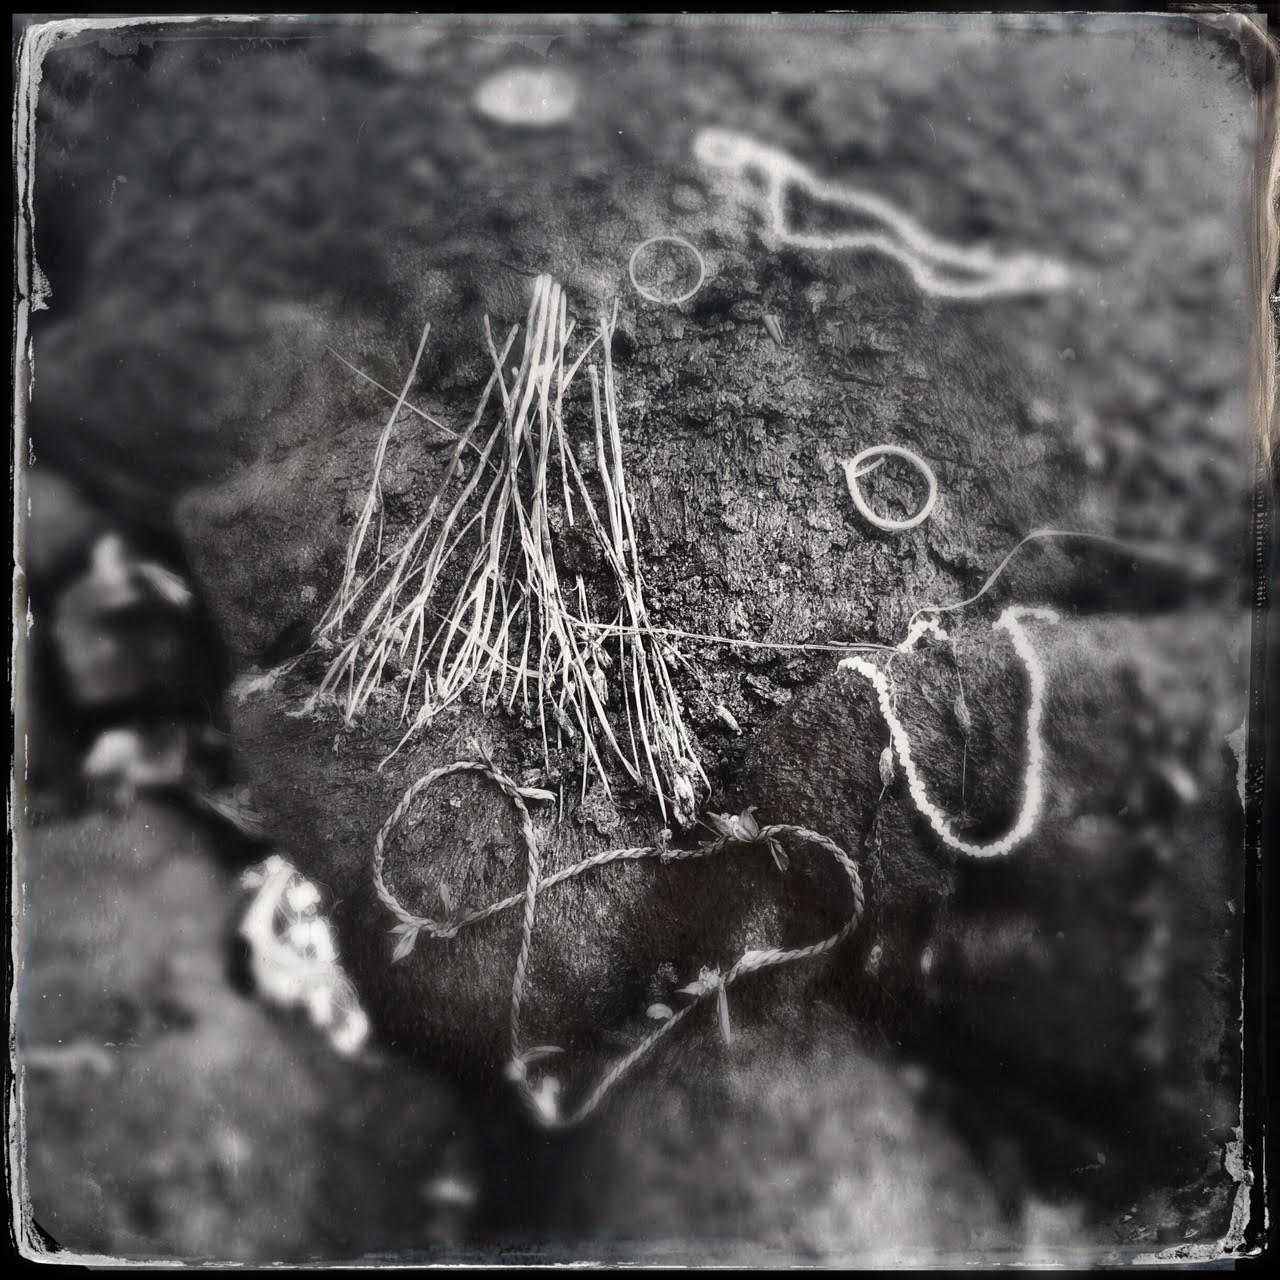 Constellation of Twists and Braids | offerings to Pele on the lava flow | Pahoa, Hawaii | February 2015